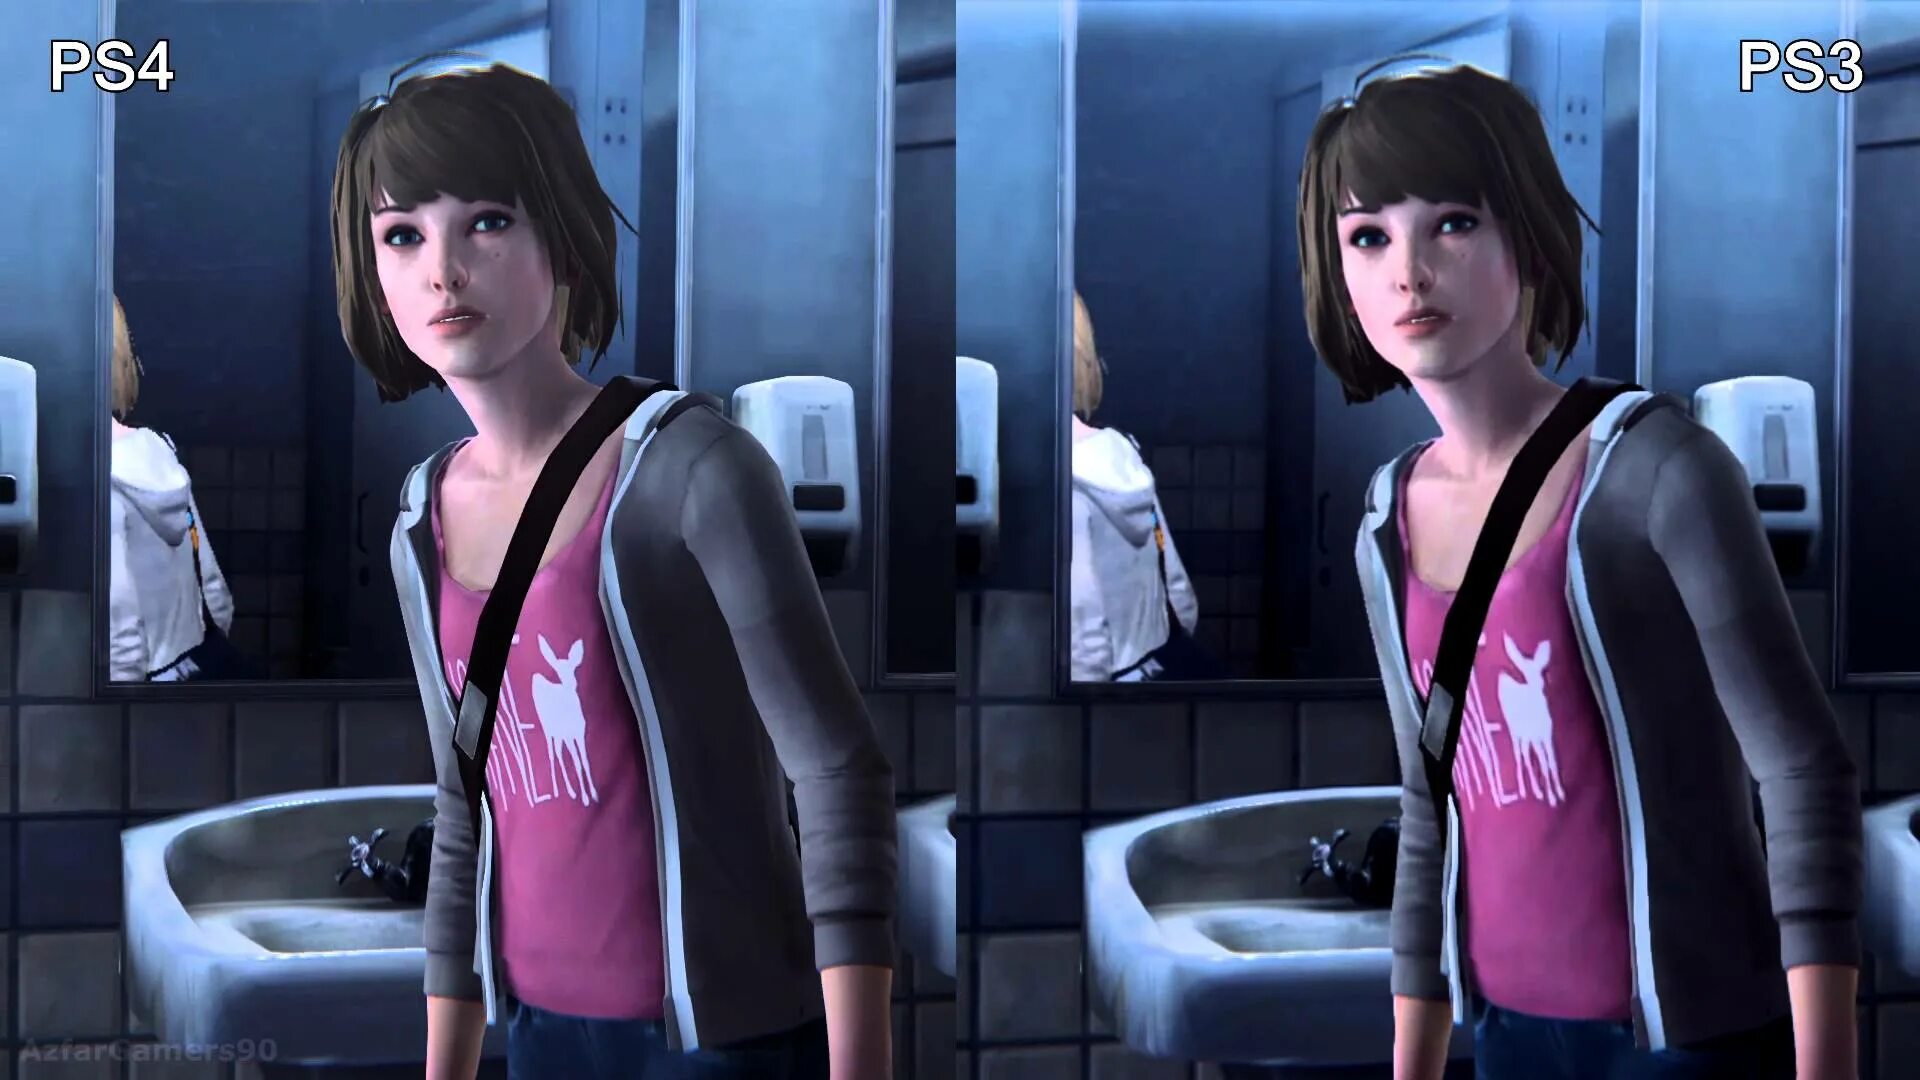 Life is damage. Life is Strange ps4. Life is Strange 3. Life is Strange PLAYSTATION 3. Life is Strange 2 (ps4).